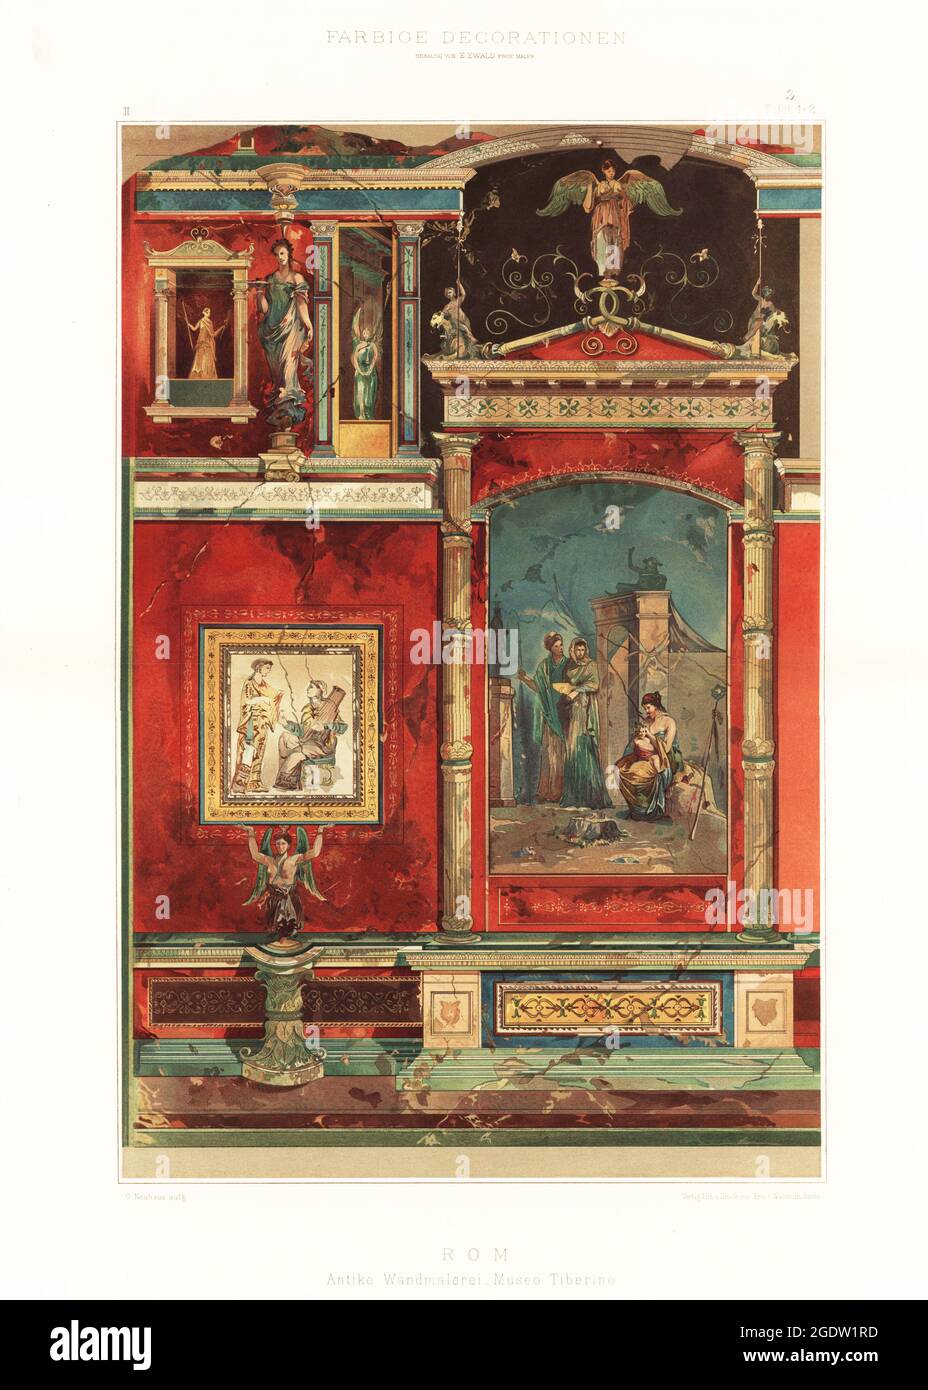 Antique wall painting in the Tiberine Museum, Rome. Now the National Roman Museum, Museo Nazionale Romano. Museo Antike Wandmaleeri, Museo Tiberino, Rom. Chromolithograph by G. Neuhaus from Ernst Ewald’s Farbige decorationen, alter und never Zeit (Color decoration, ancient and new eras), Ernst Wasmuth, Berlin, 1896. Stock Photo